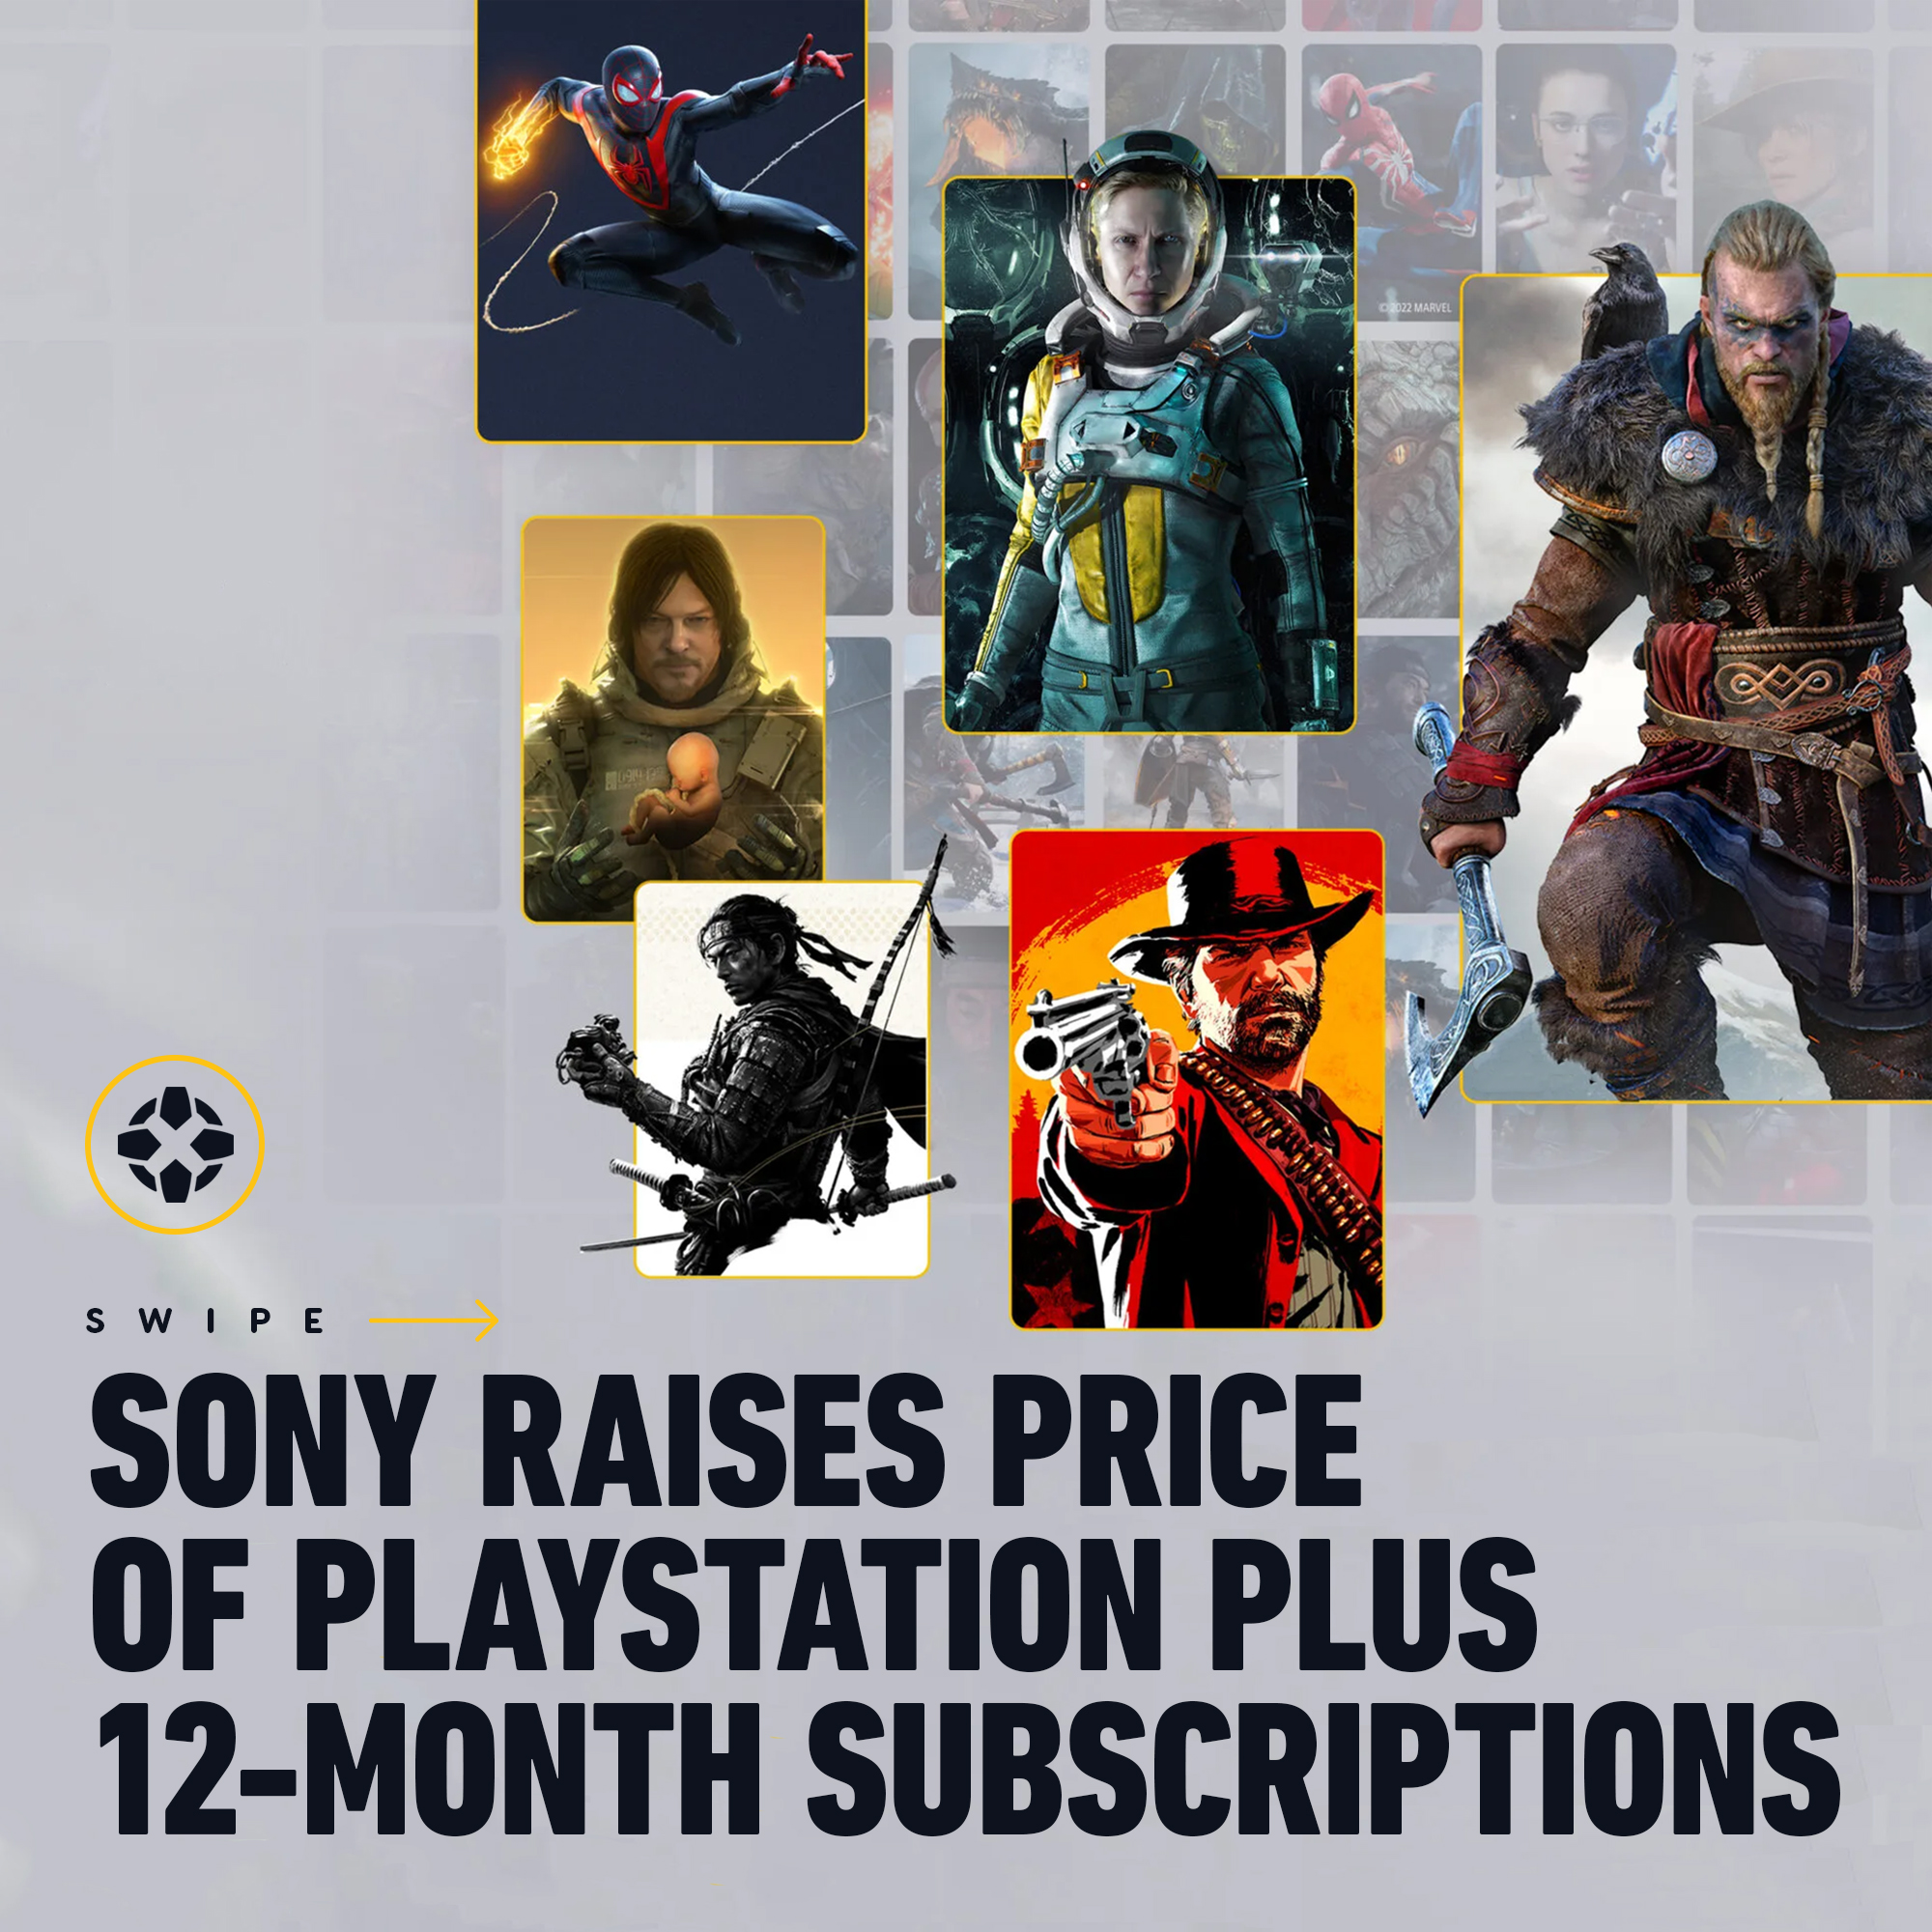 Playstation Plus subscription price increasing in September